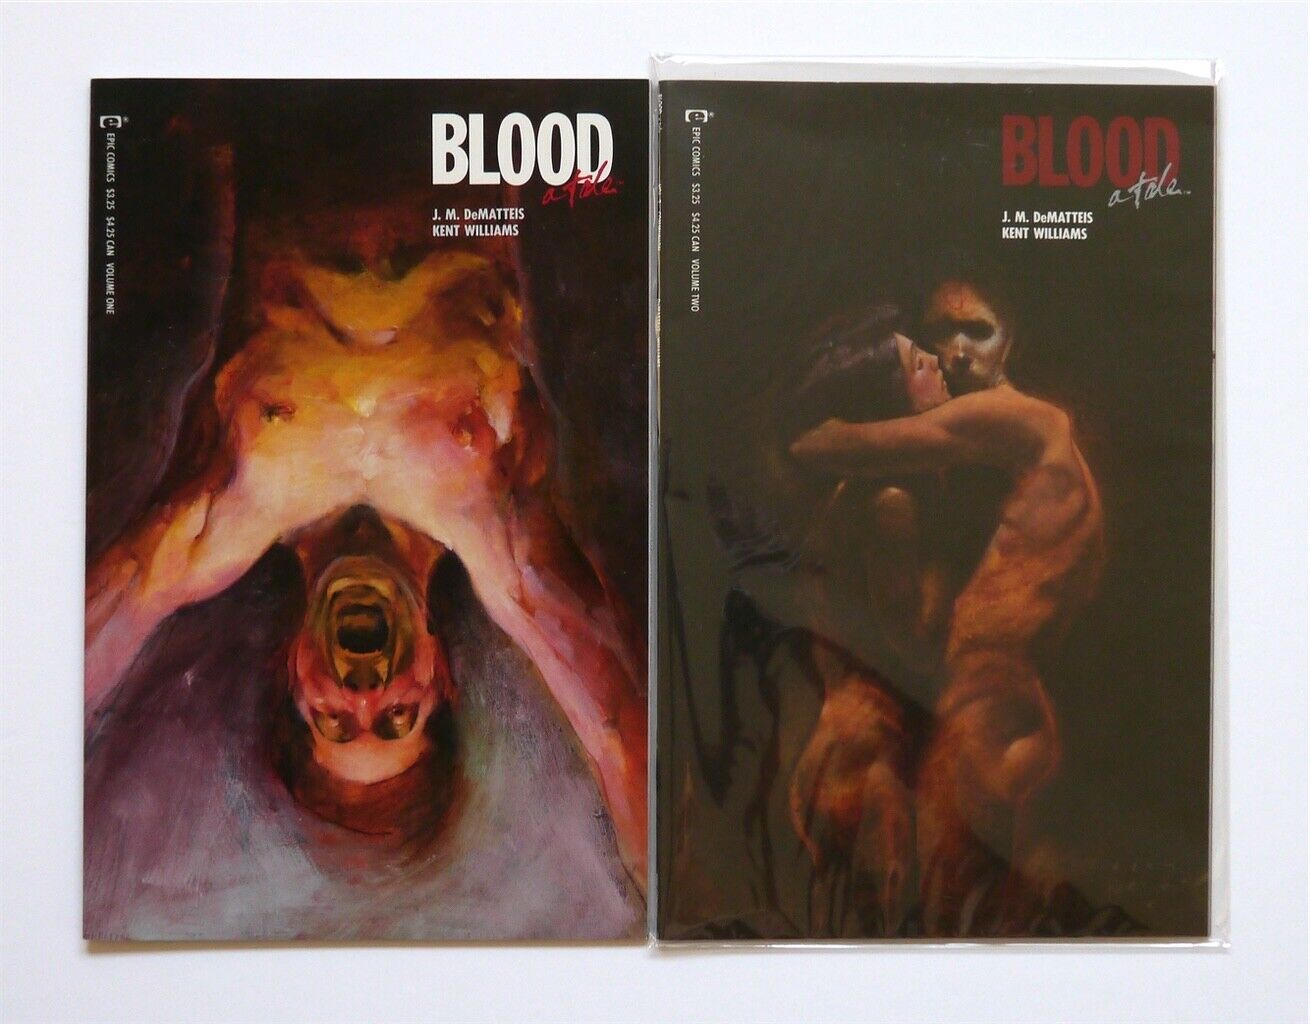 Blood: A Tale mini-series from Epic by DeMatteis and Williams. First two issues.